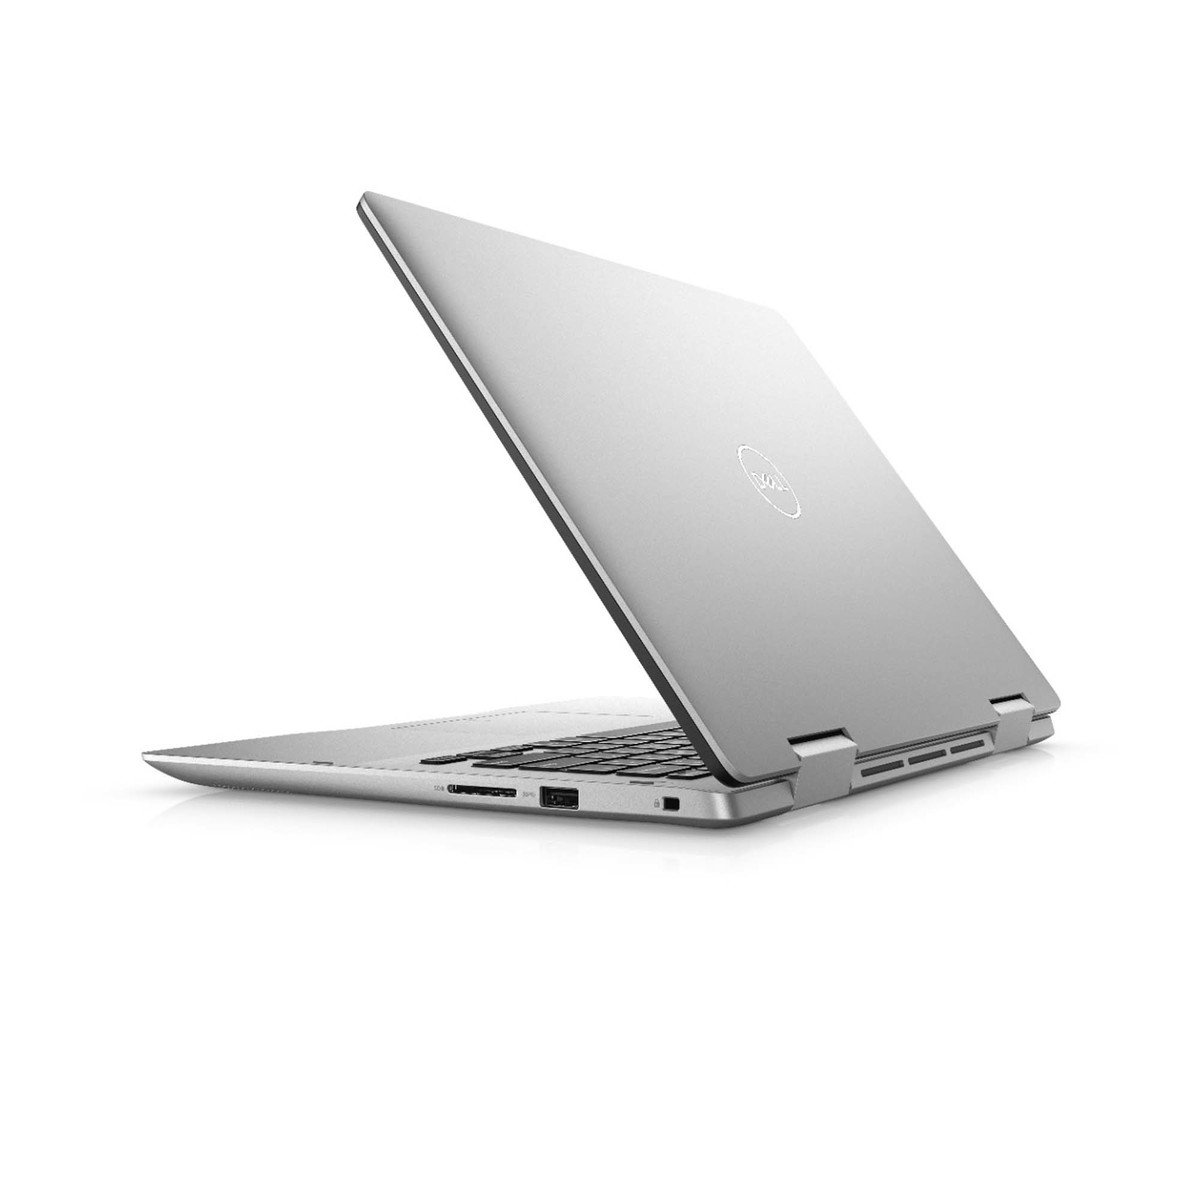 Dell Inspiron 14-5491-(2in1)Laptop-Core i5-10210U,8GBRAM,256GB SSD,14.0" FHD+Touch Display,Windows 10 Home,Silver